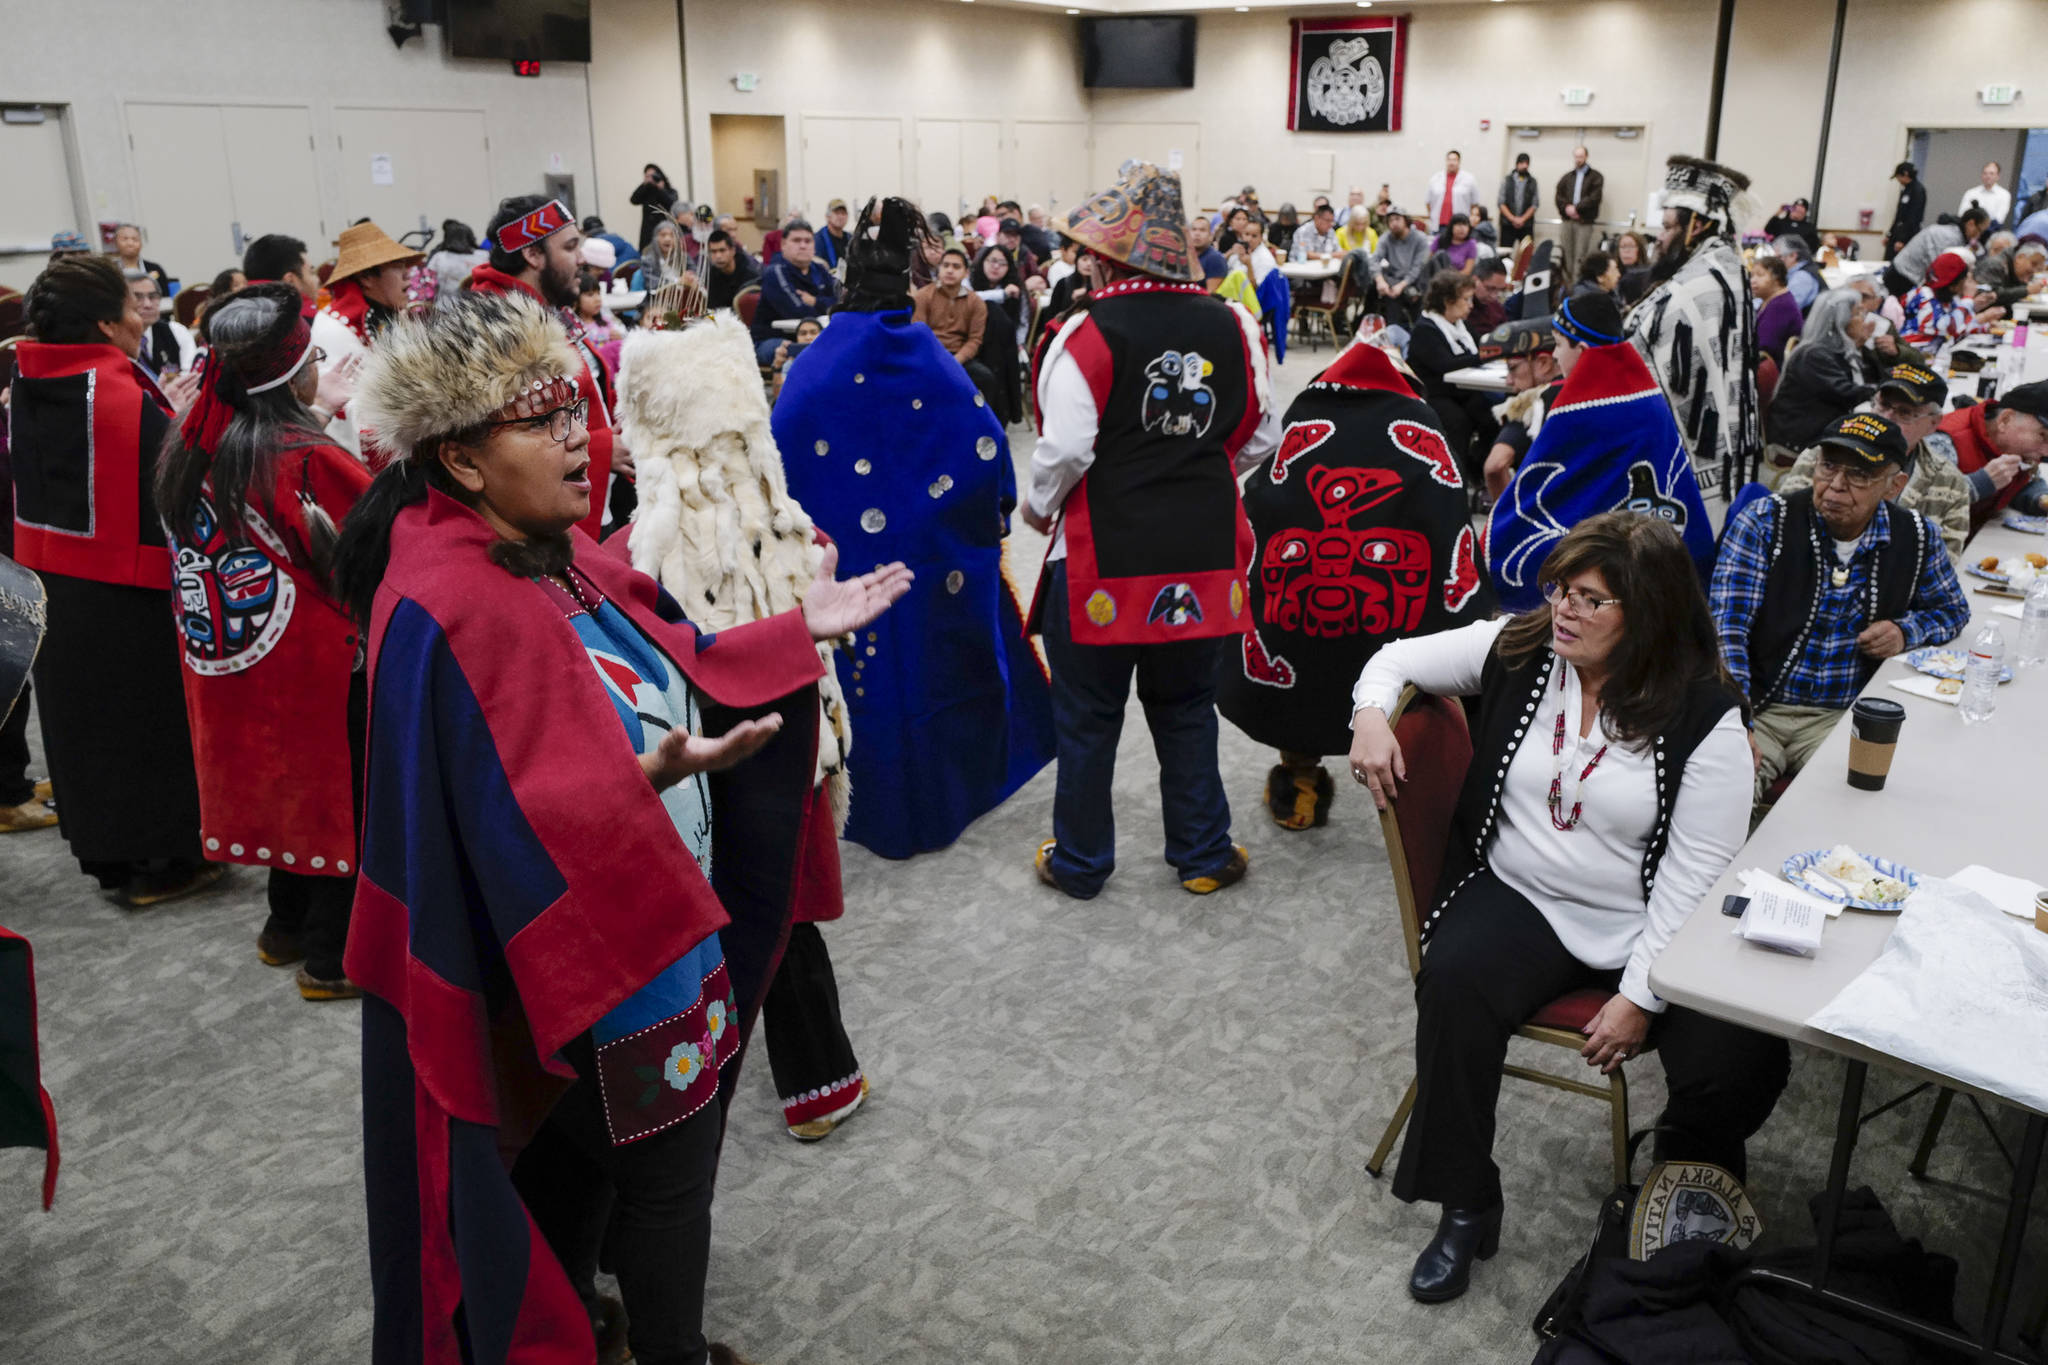 The Yaaw Tei Yi Dance Group performs during the Southeast Alaska Native Veteran’s Veterans Day luncheon at the Elizabeth Peratrovich Hall on Monday, Nov. 11, 2019. (Michael Penn | Juneau Empire)